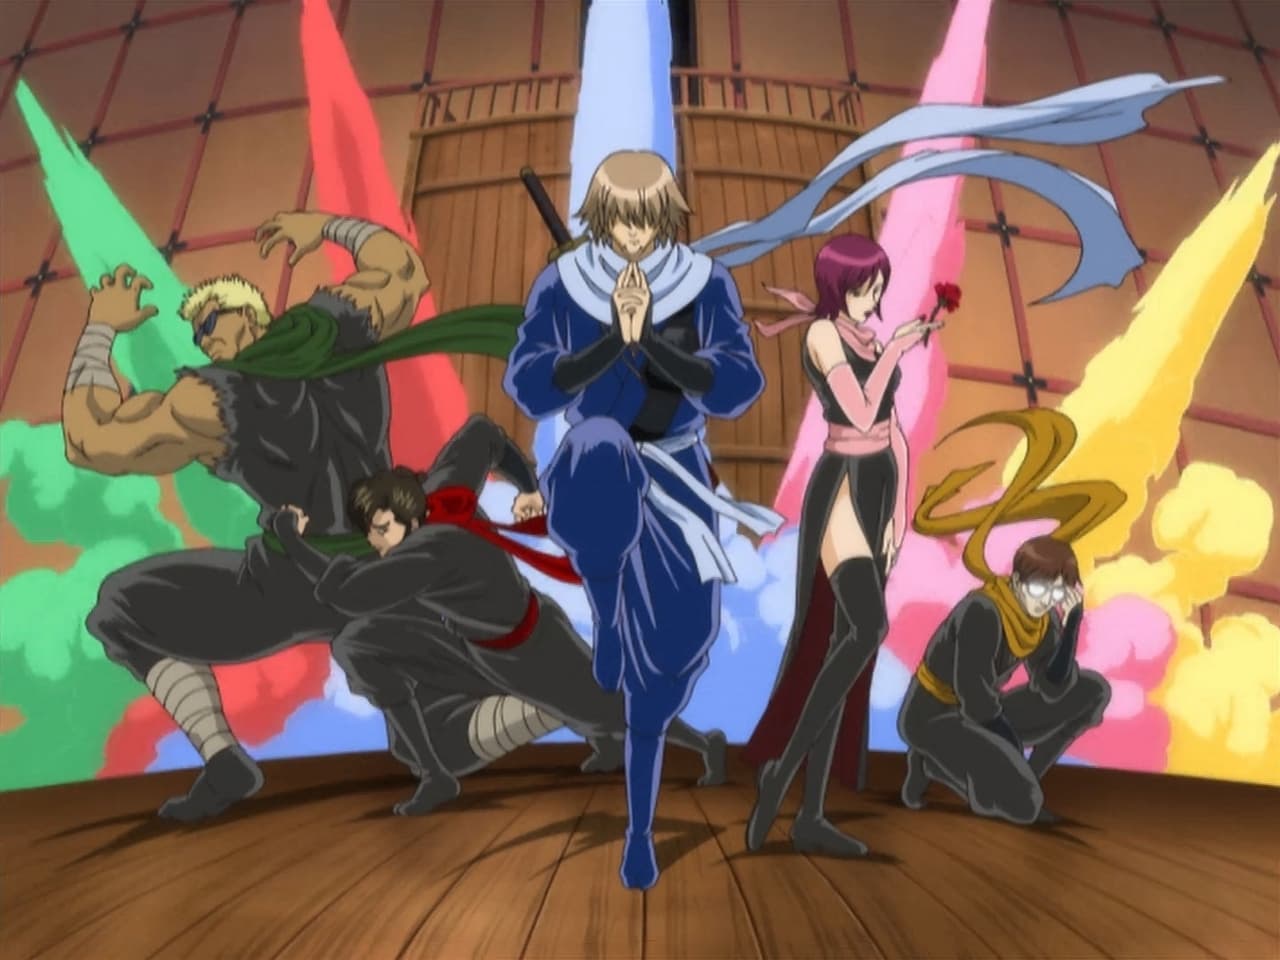 Gintama - Season 1 Episode 44 : Mom’s Busy, Too, So Quit Complaining About What’s for Dinner